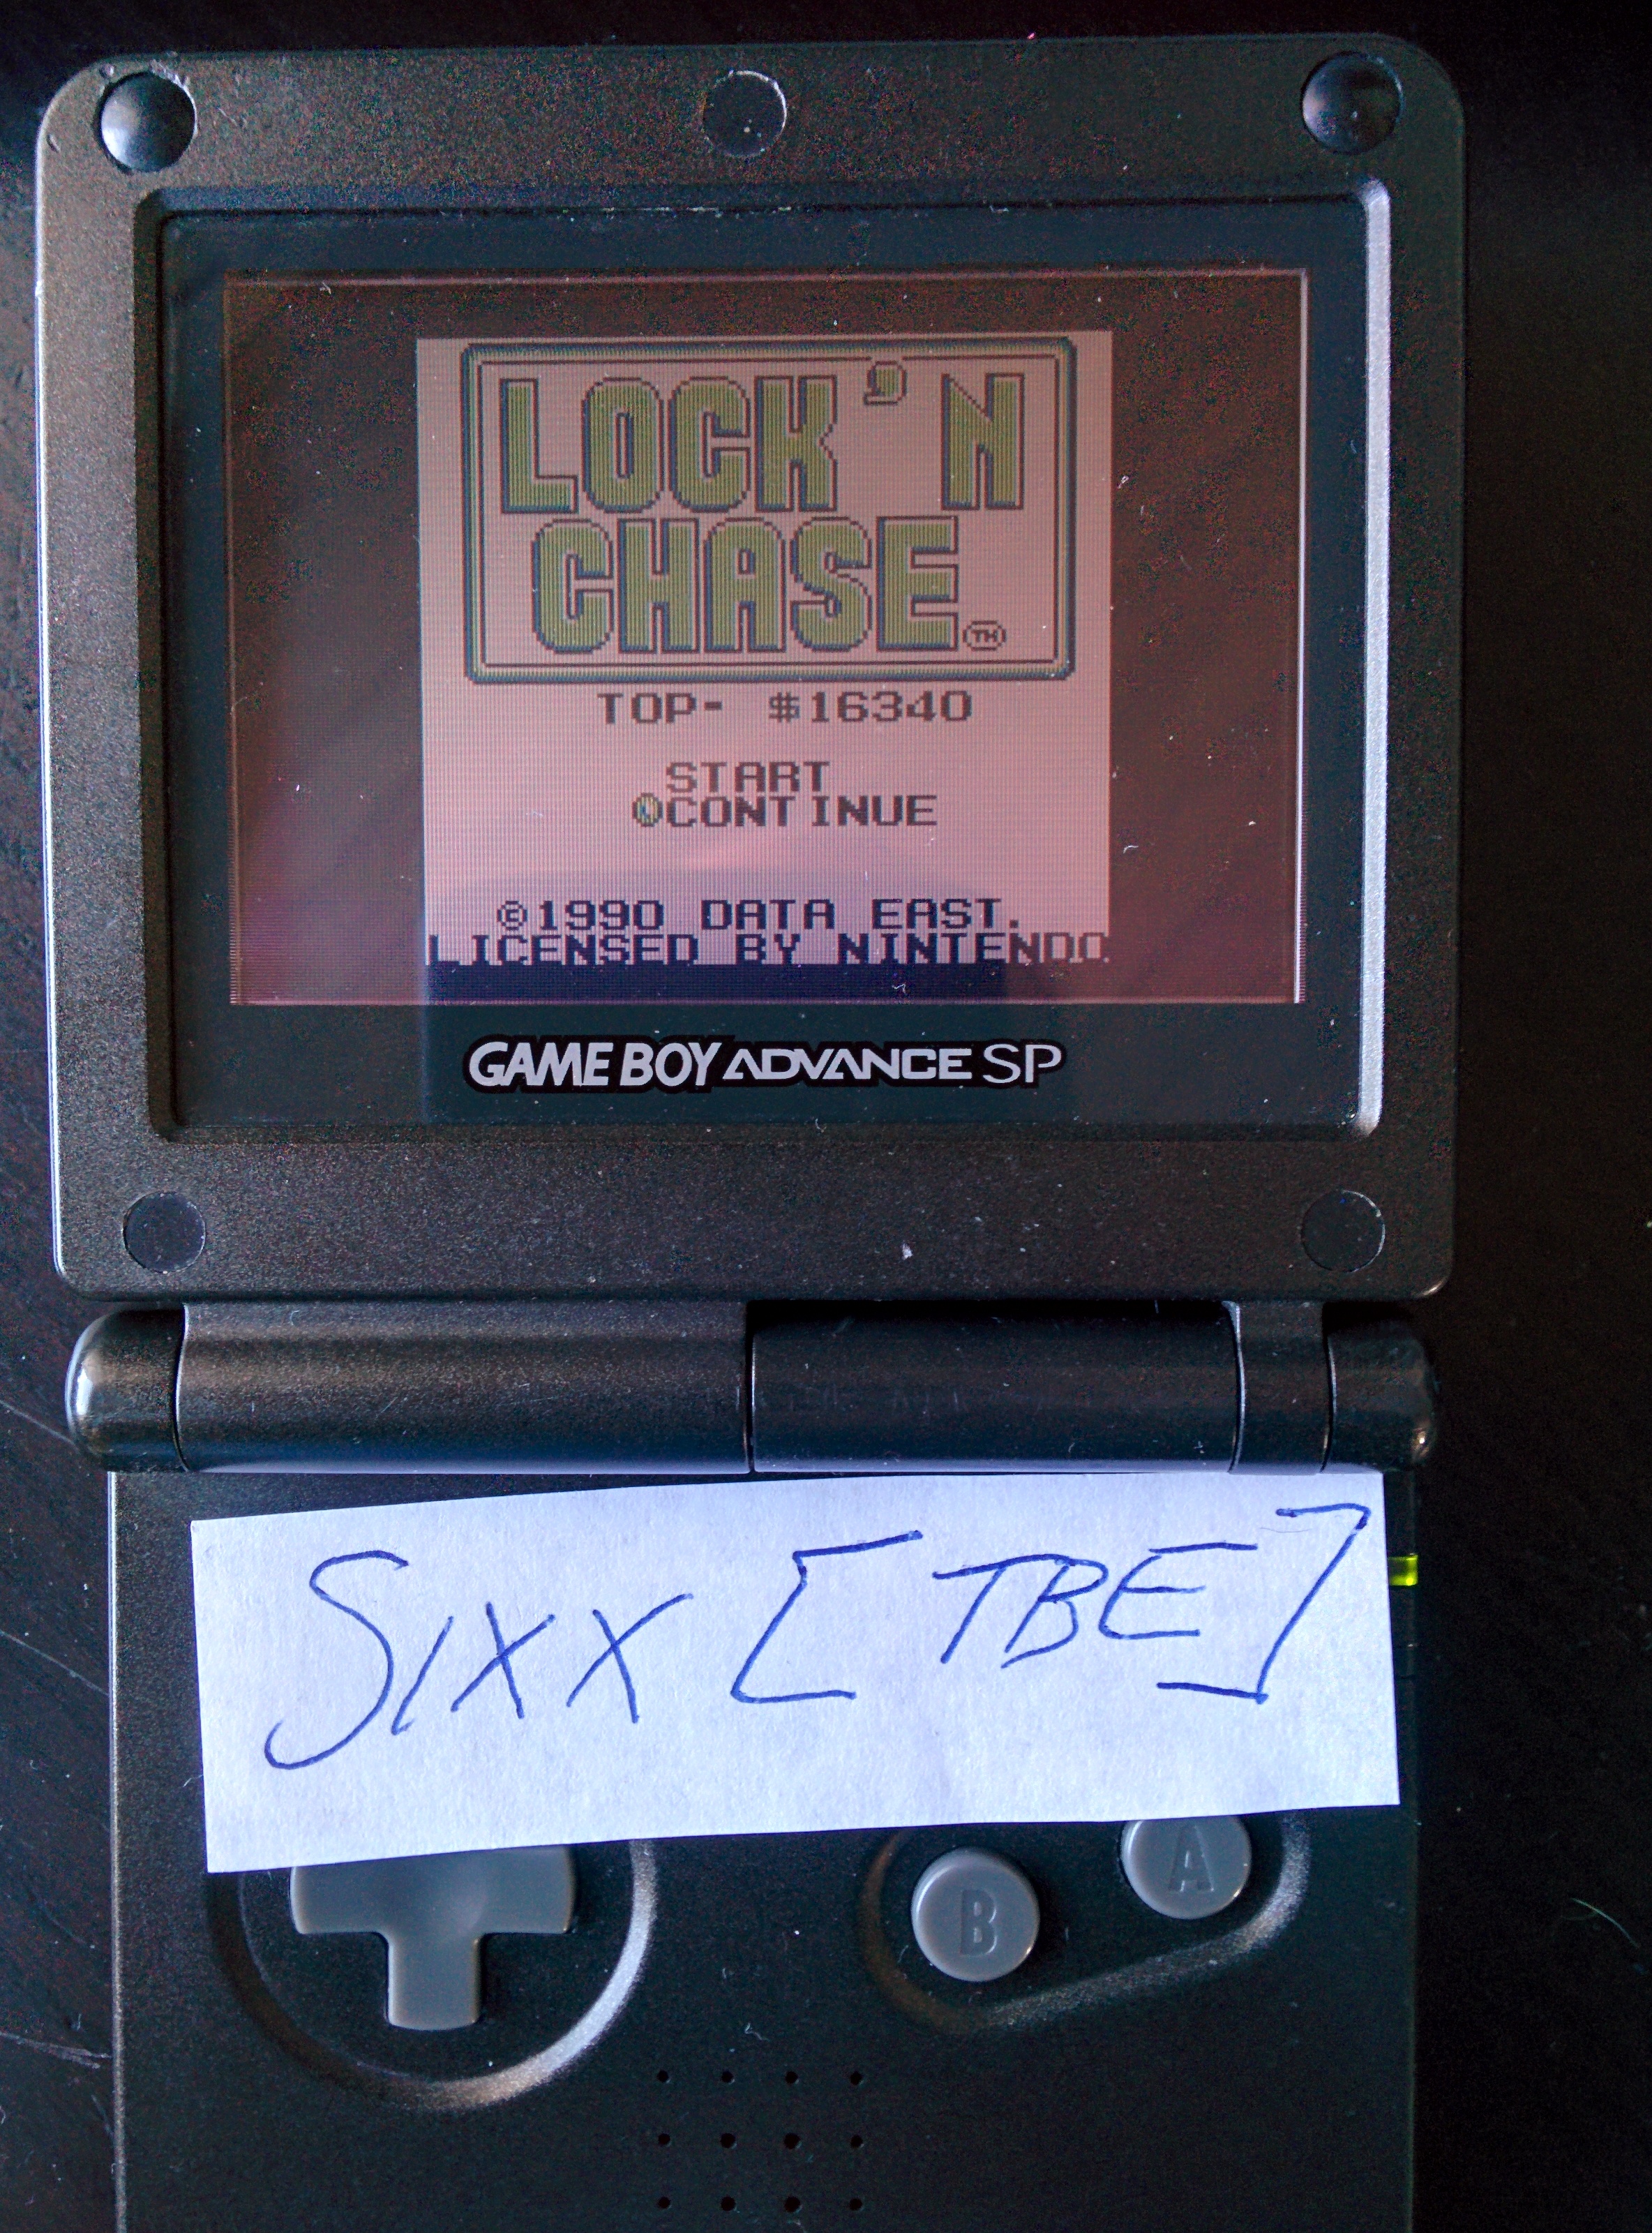 Sixx: Lock N Chase (Game Boy) 16,340 points on 2014-07-16 15:31:35